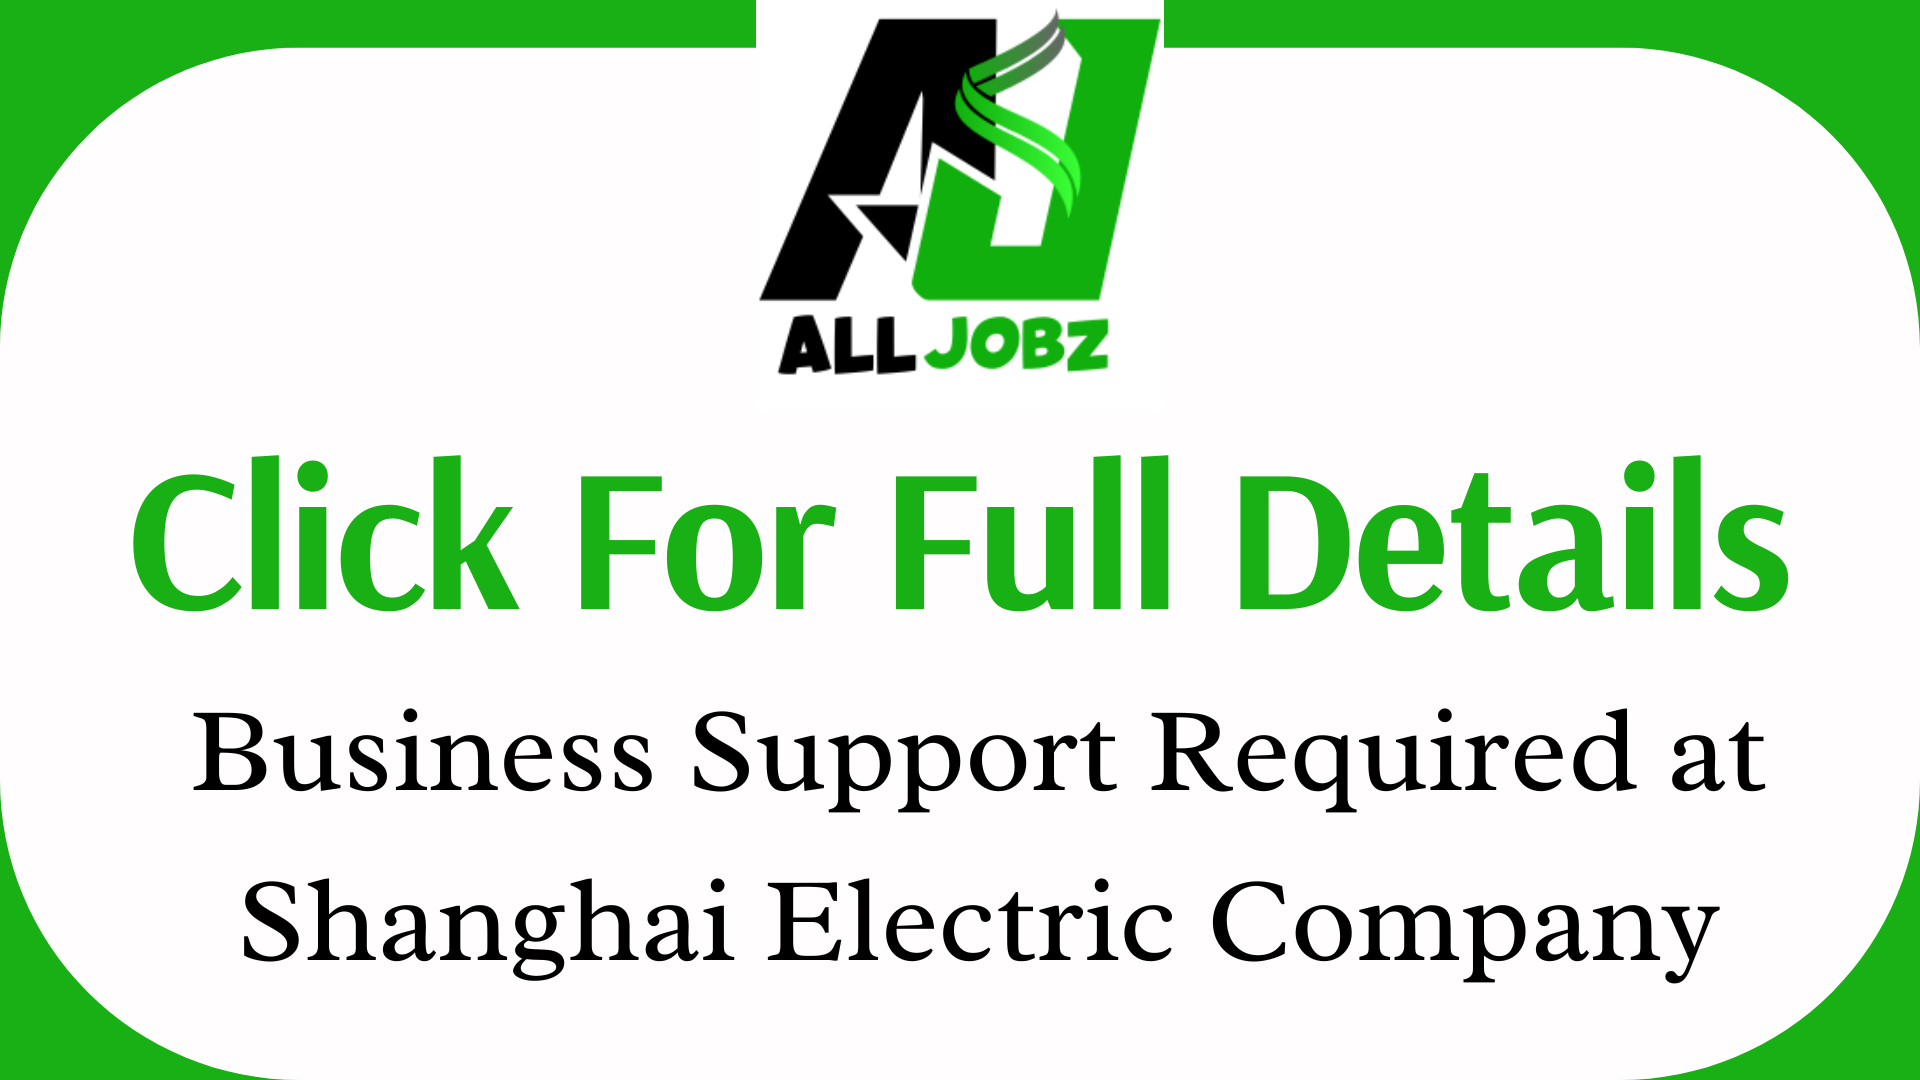 Commercial / Business Support Required At Shanghai Electric Company, Shanghai Electric Pakistan Jobs, Shanghai Electric Company Jobs In Pakistan, Shanghai Electric Karachi Jobs, Shanghai Electric Power Company Limited Pakistan Location, Shanghai Electric Thar Coal Jobs, Shanghai Electric Karachi Office Address, Shanghai Electric Holdings Group Co Ltd, Shanghai Electric Ceo,